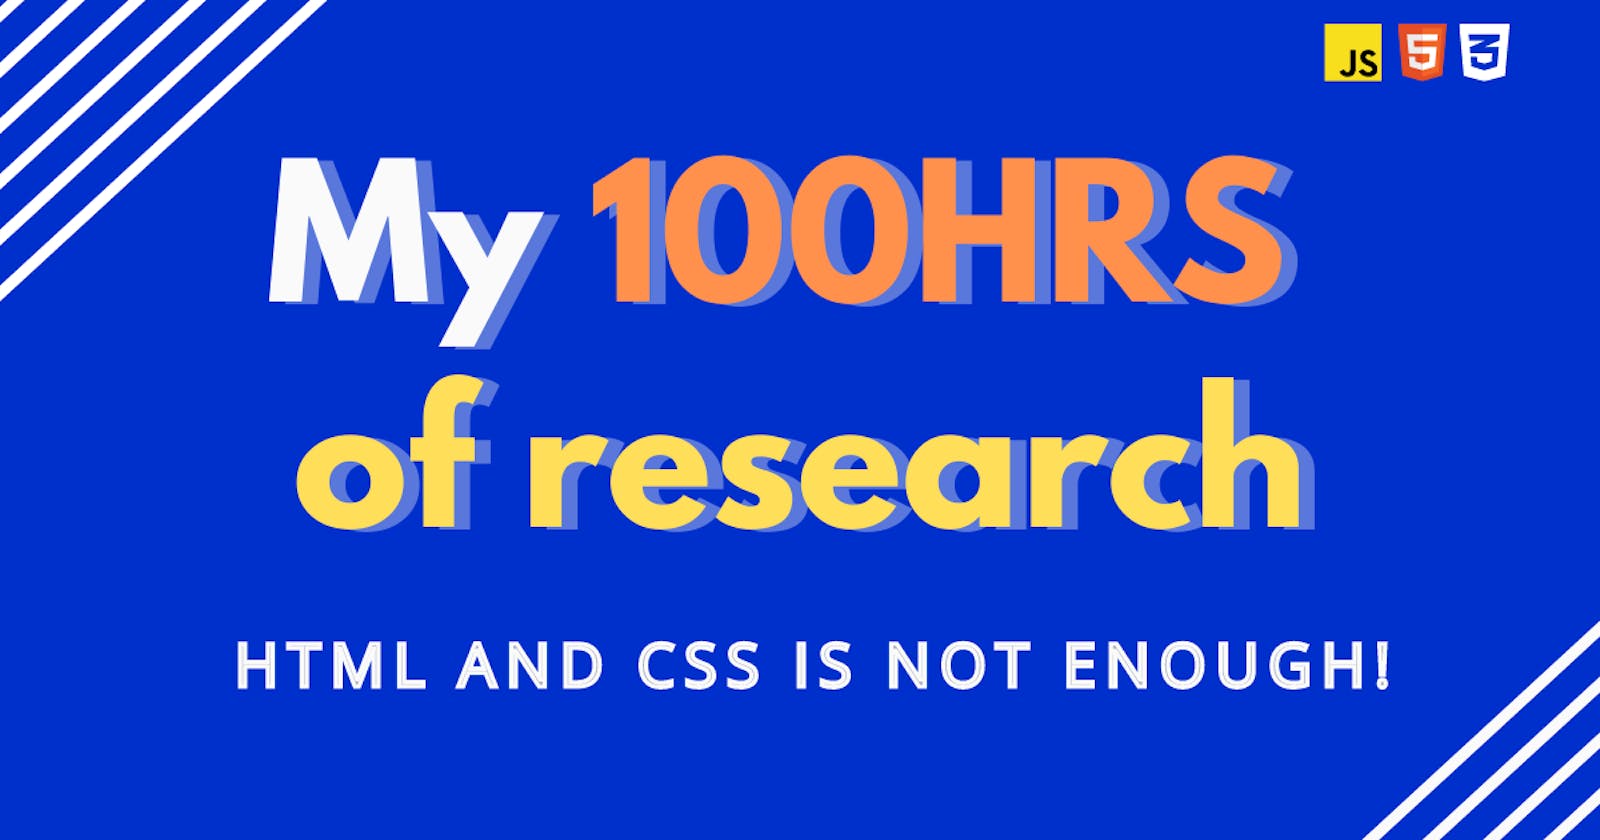 My 100Hrs of research: HTML nd CSS is not enough